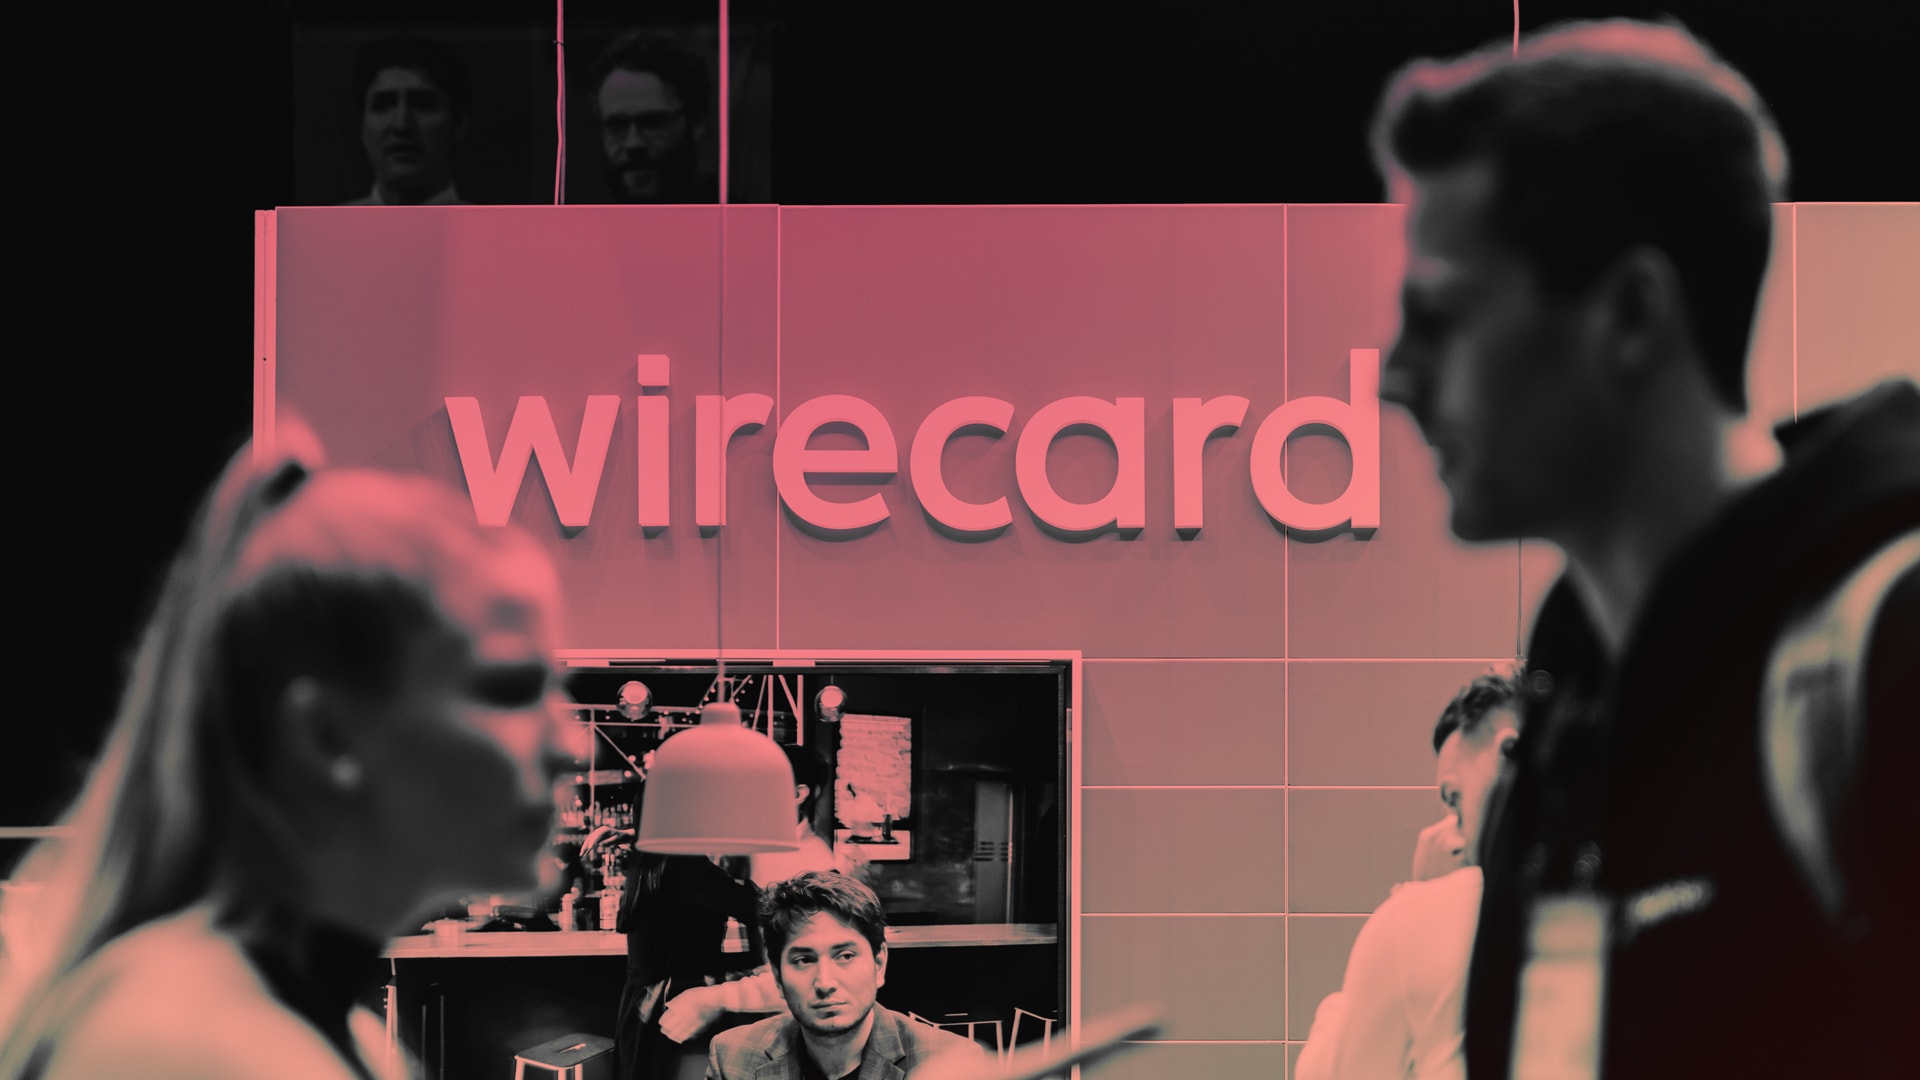 Wirecard insolvency: What to know about Germany’s biggest tech fraud scandal